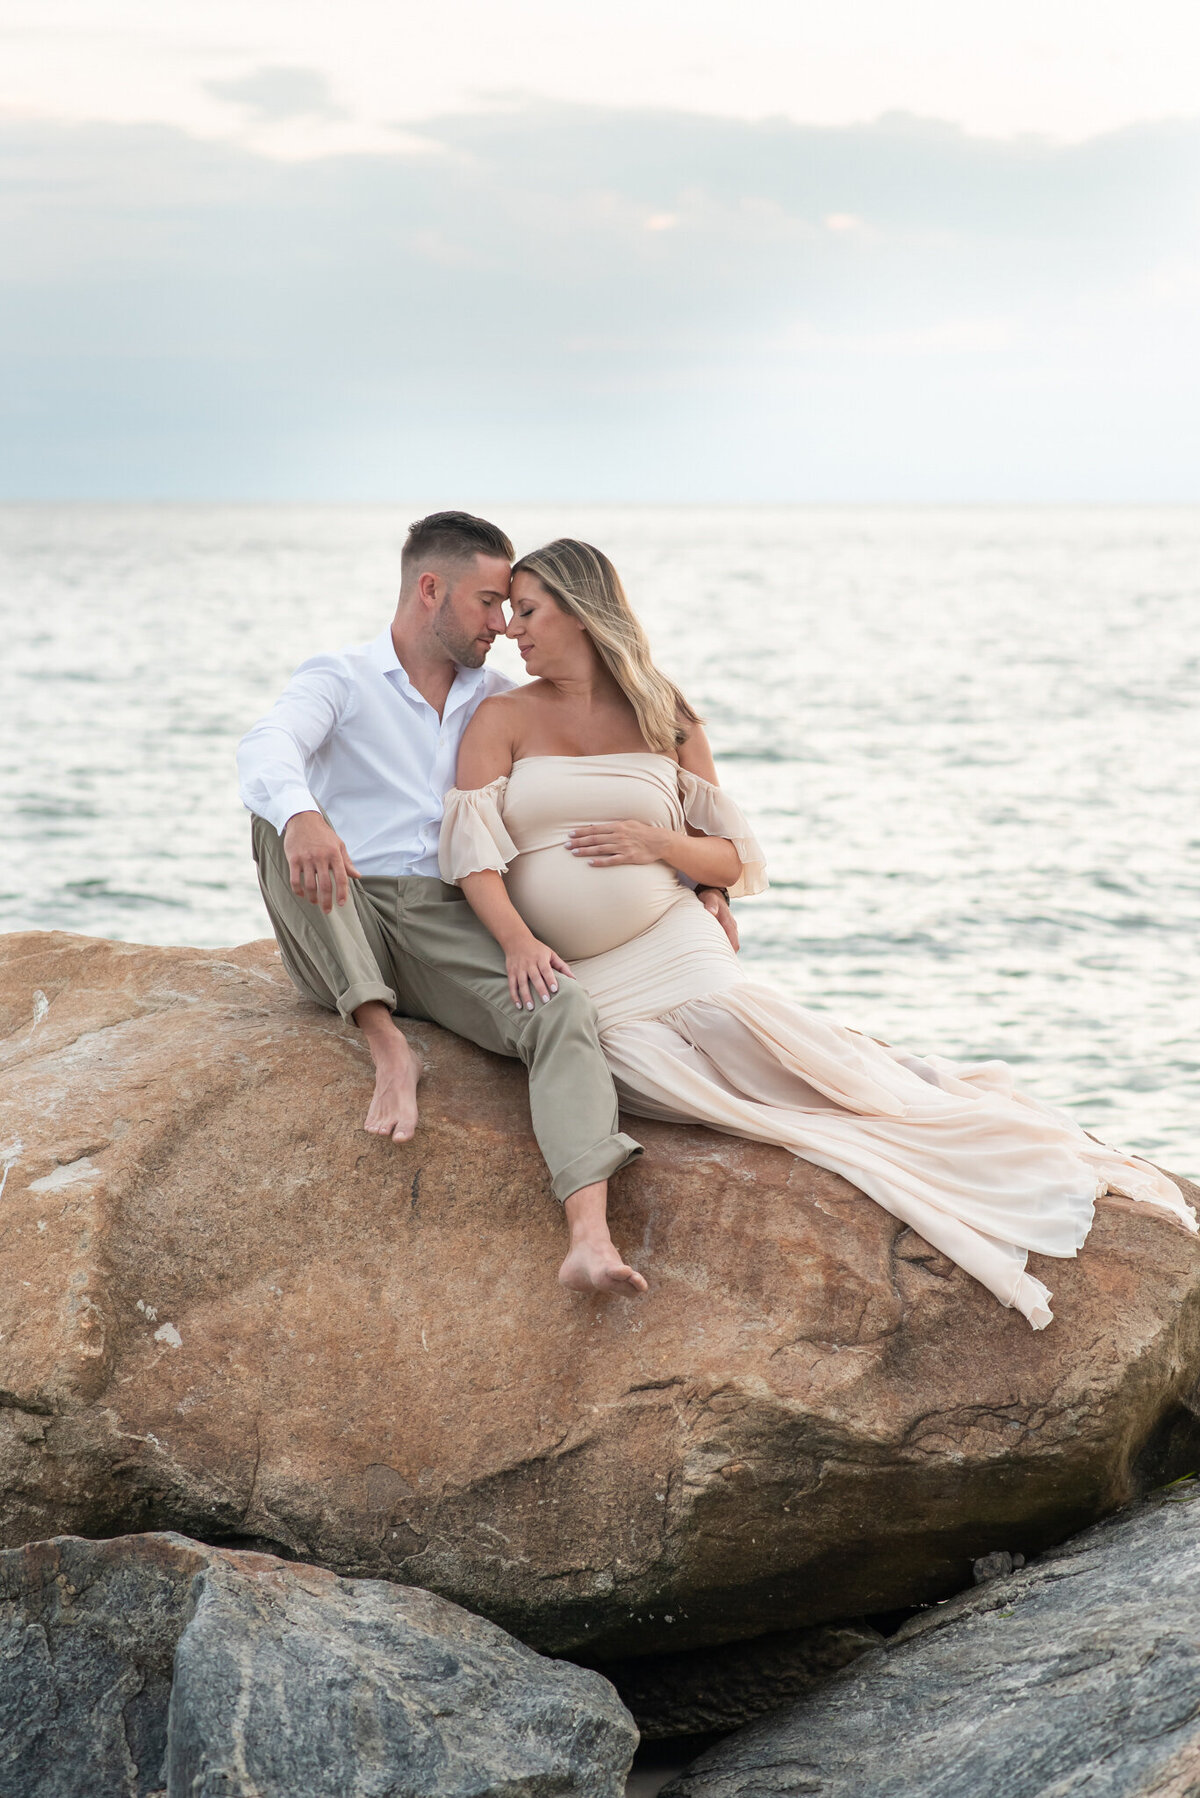 Couple sitting on rock, kissing at sunset beach maternity session | Sharon Leger Photography | Newborn & Family Photographer, Canton, Connecticut